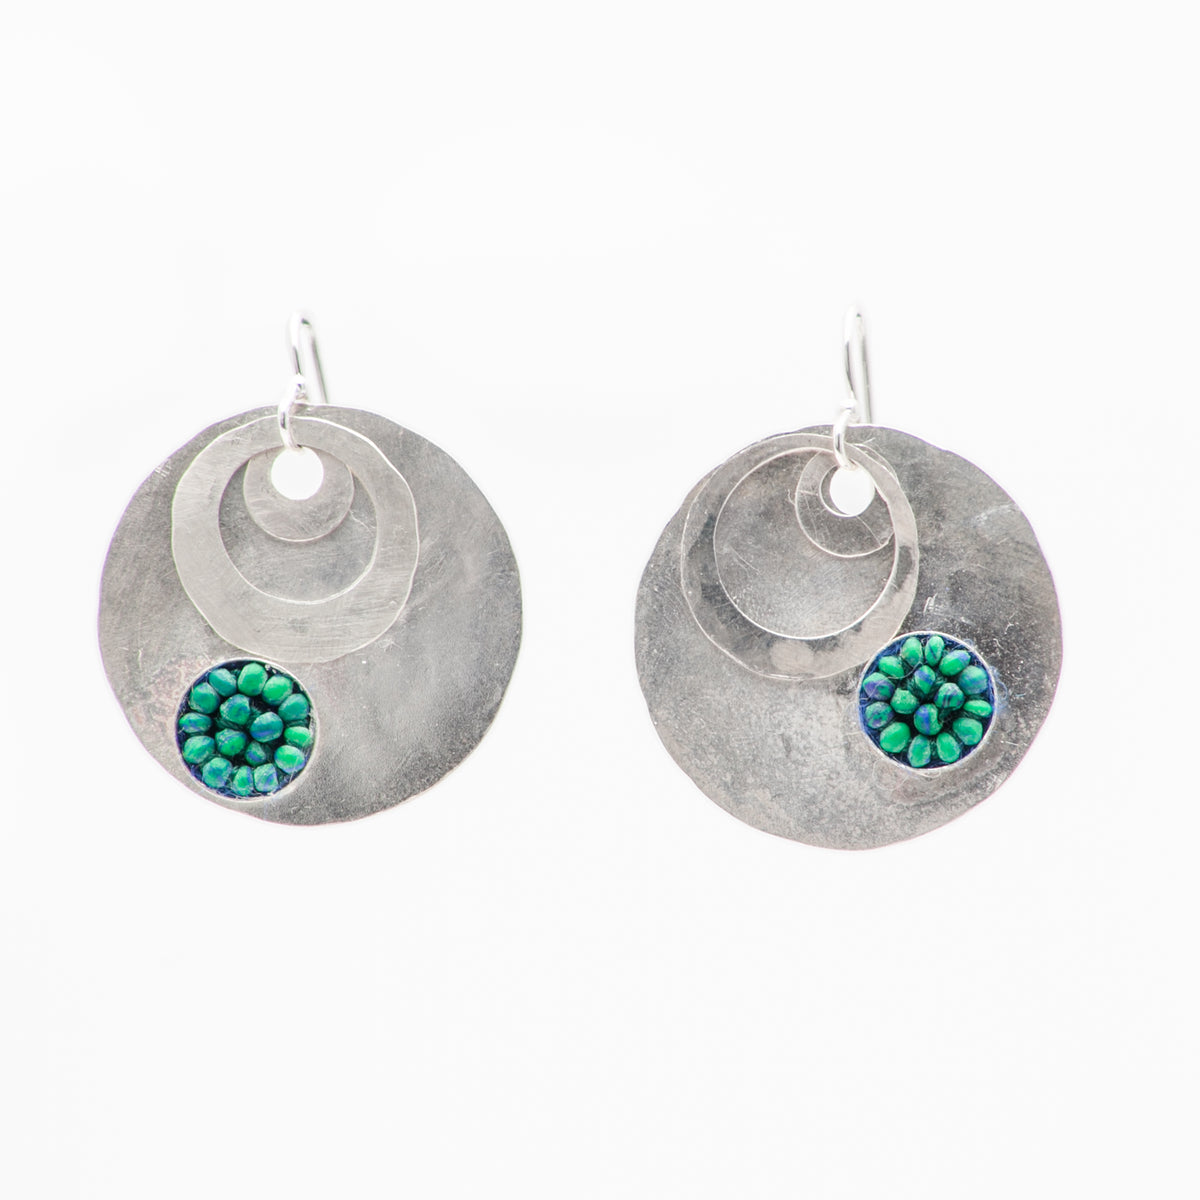 Iconic Hand Hammered Silver Coin with Azurite Mosaic Earrings